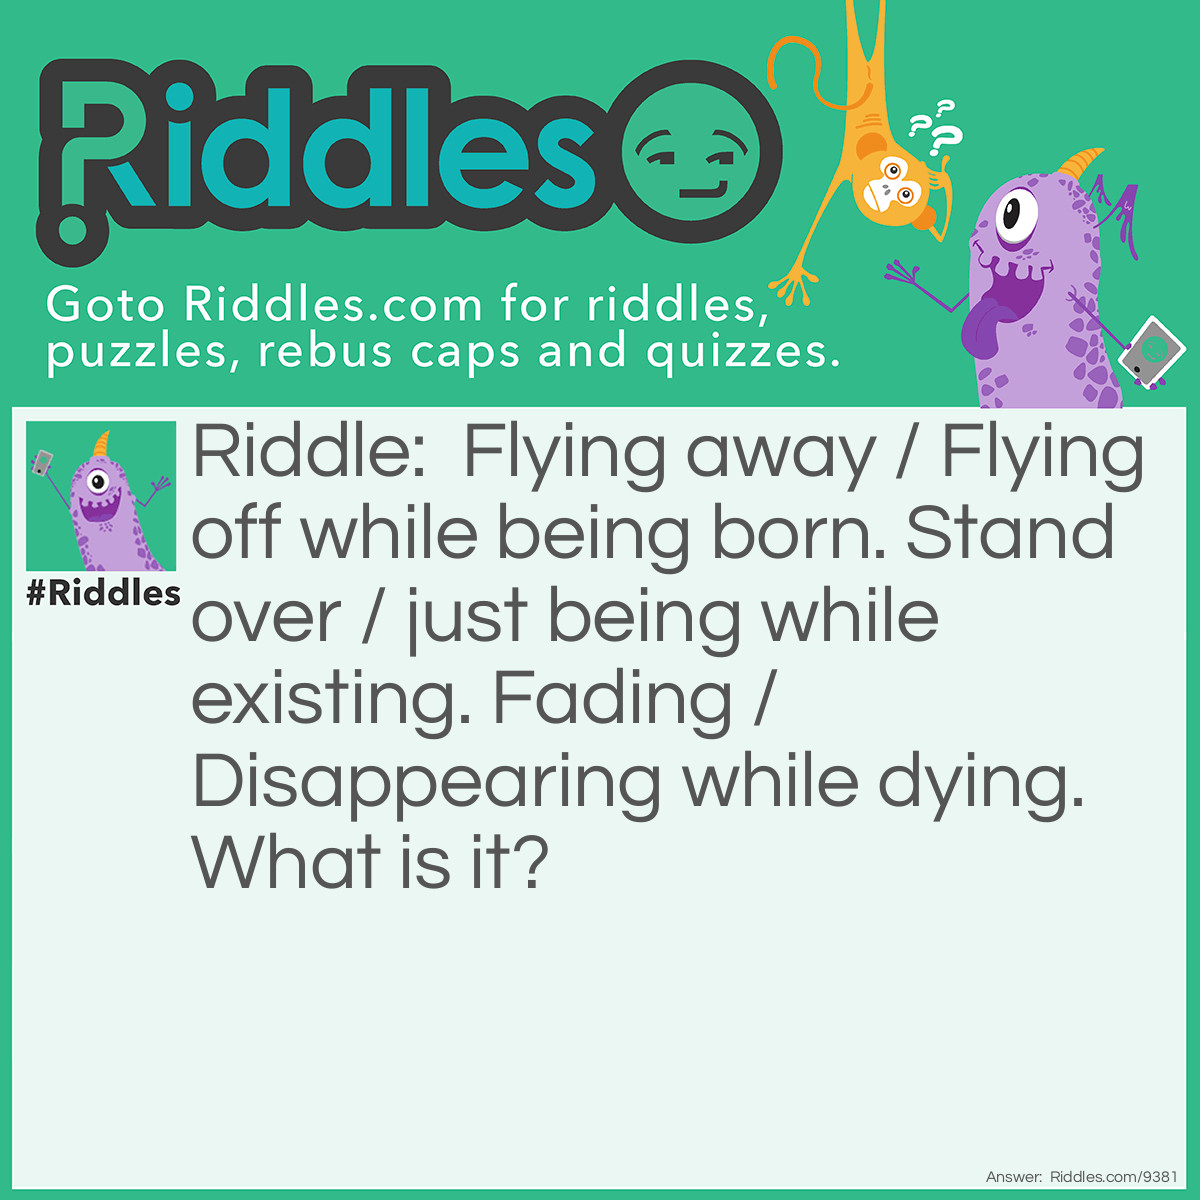 Riddle: Flying away / Flying off while being born. Stand over / just being while existing. Fading / Disappearing while dying. What is it? Answer: i don't know!